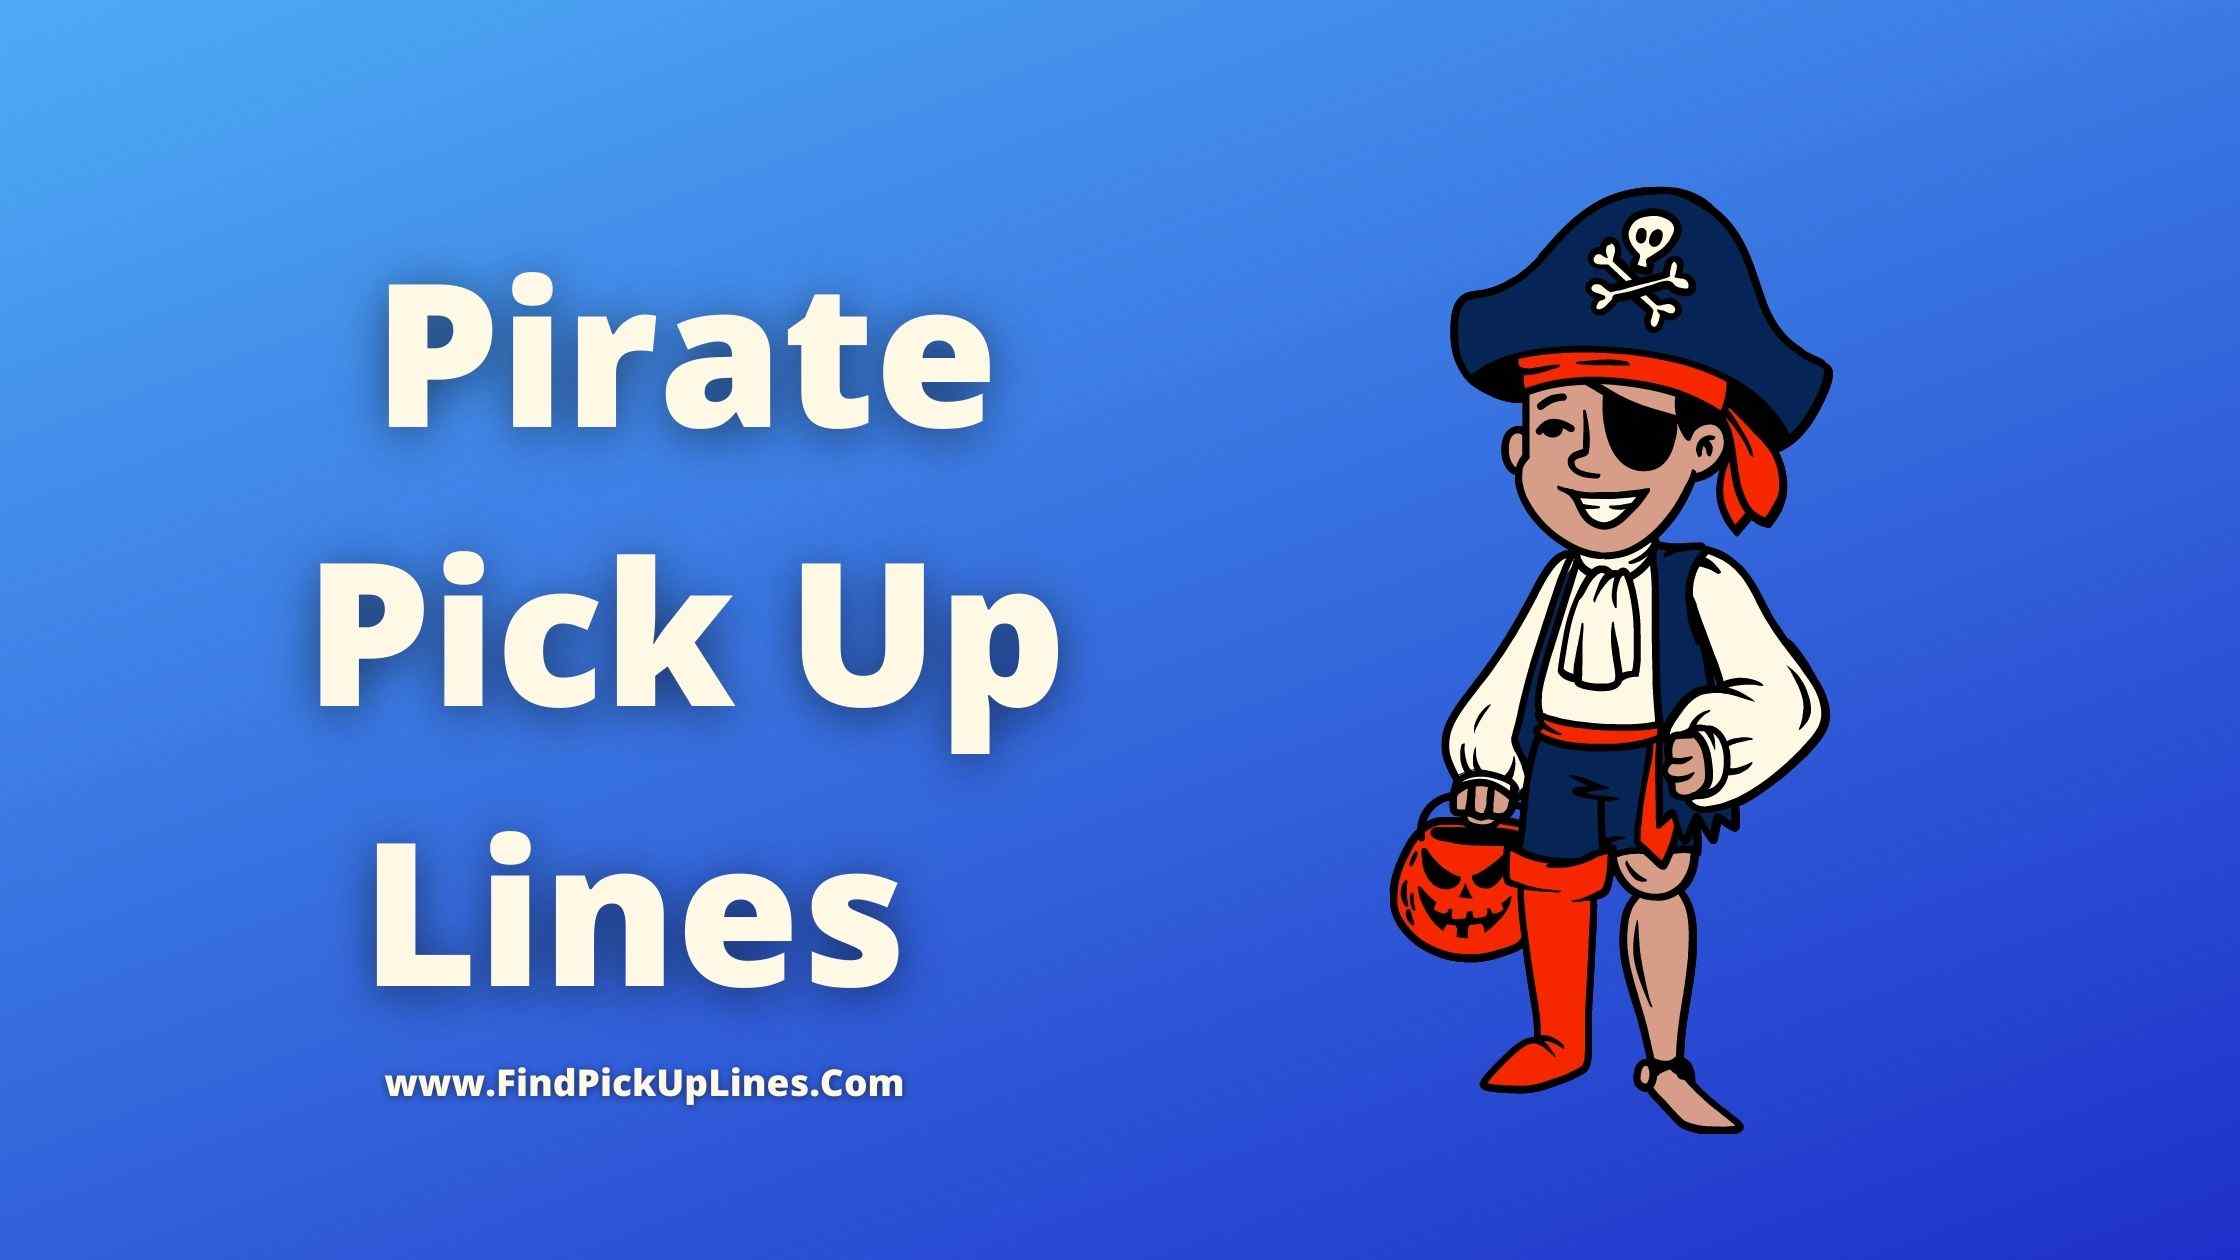 Pirate Pick Up Lines